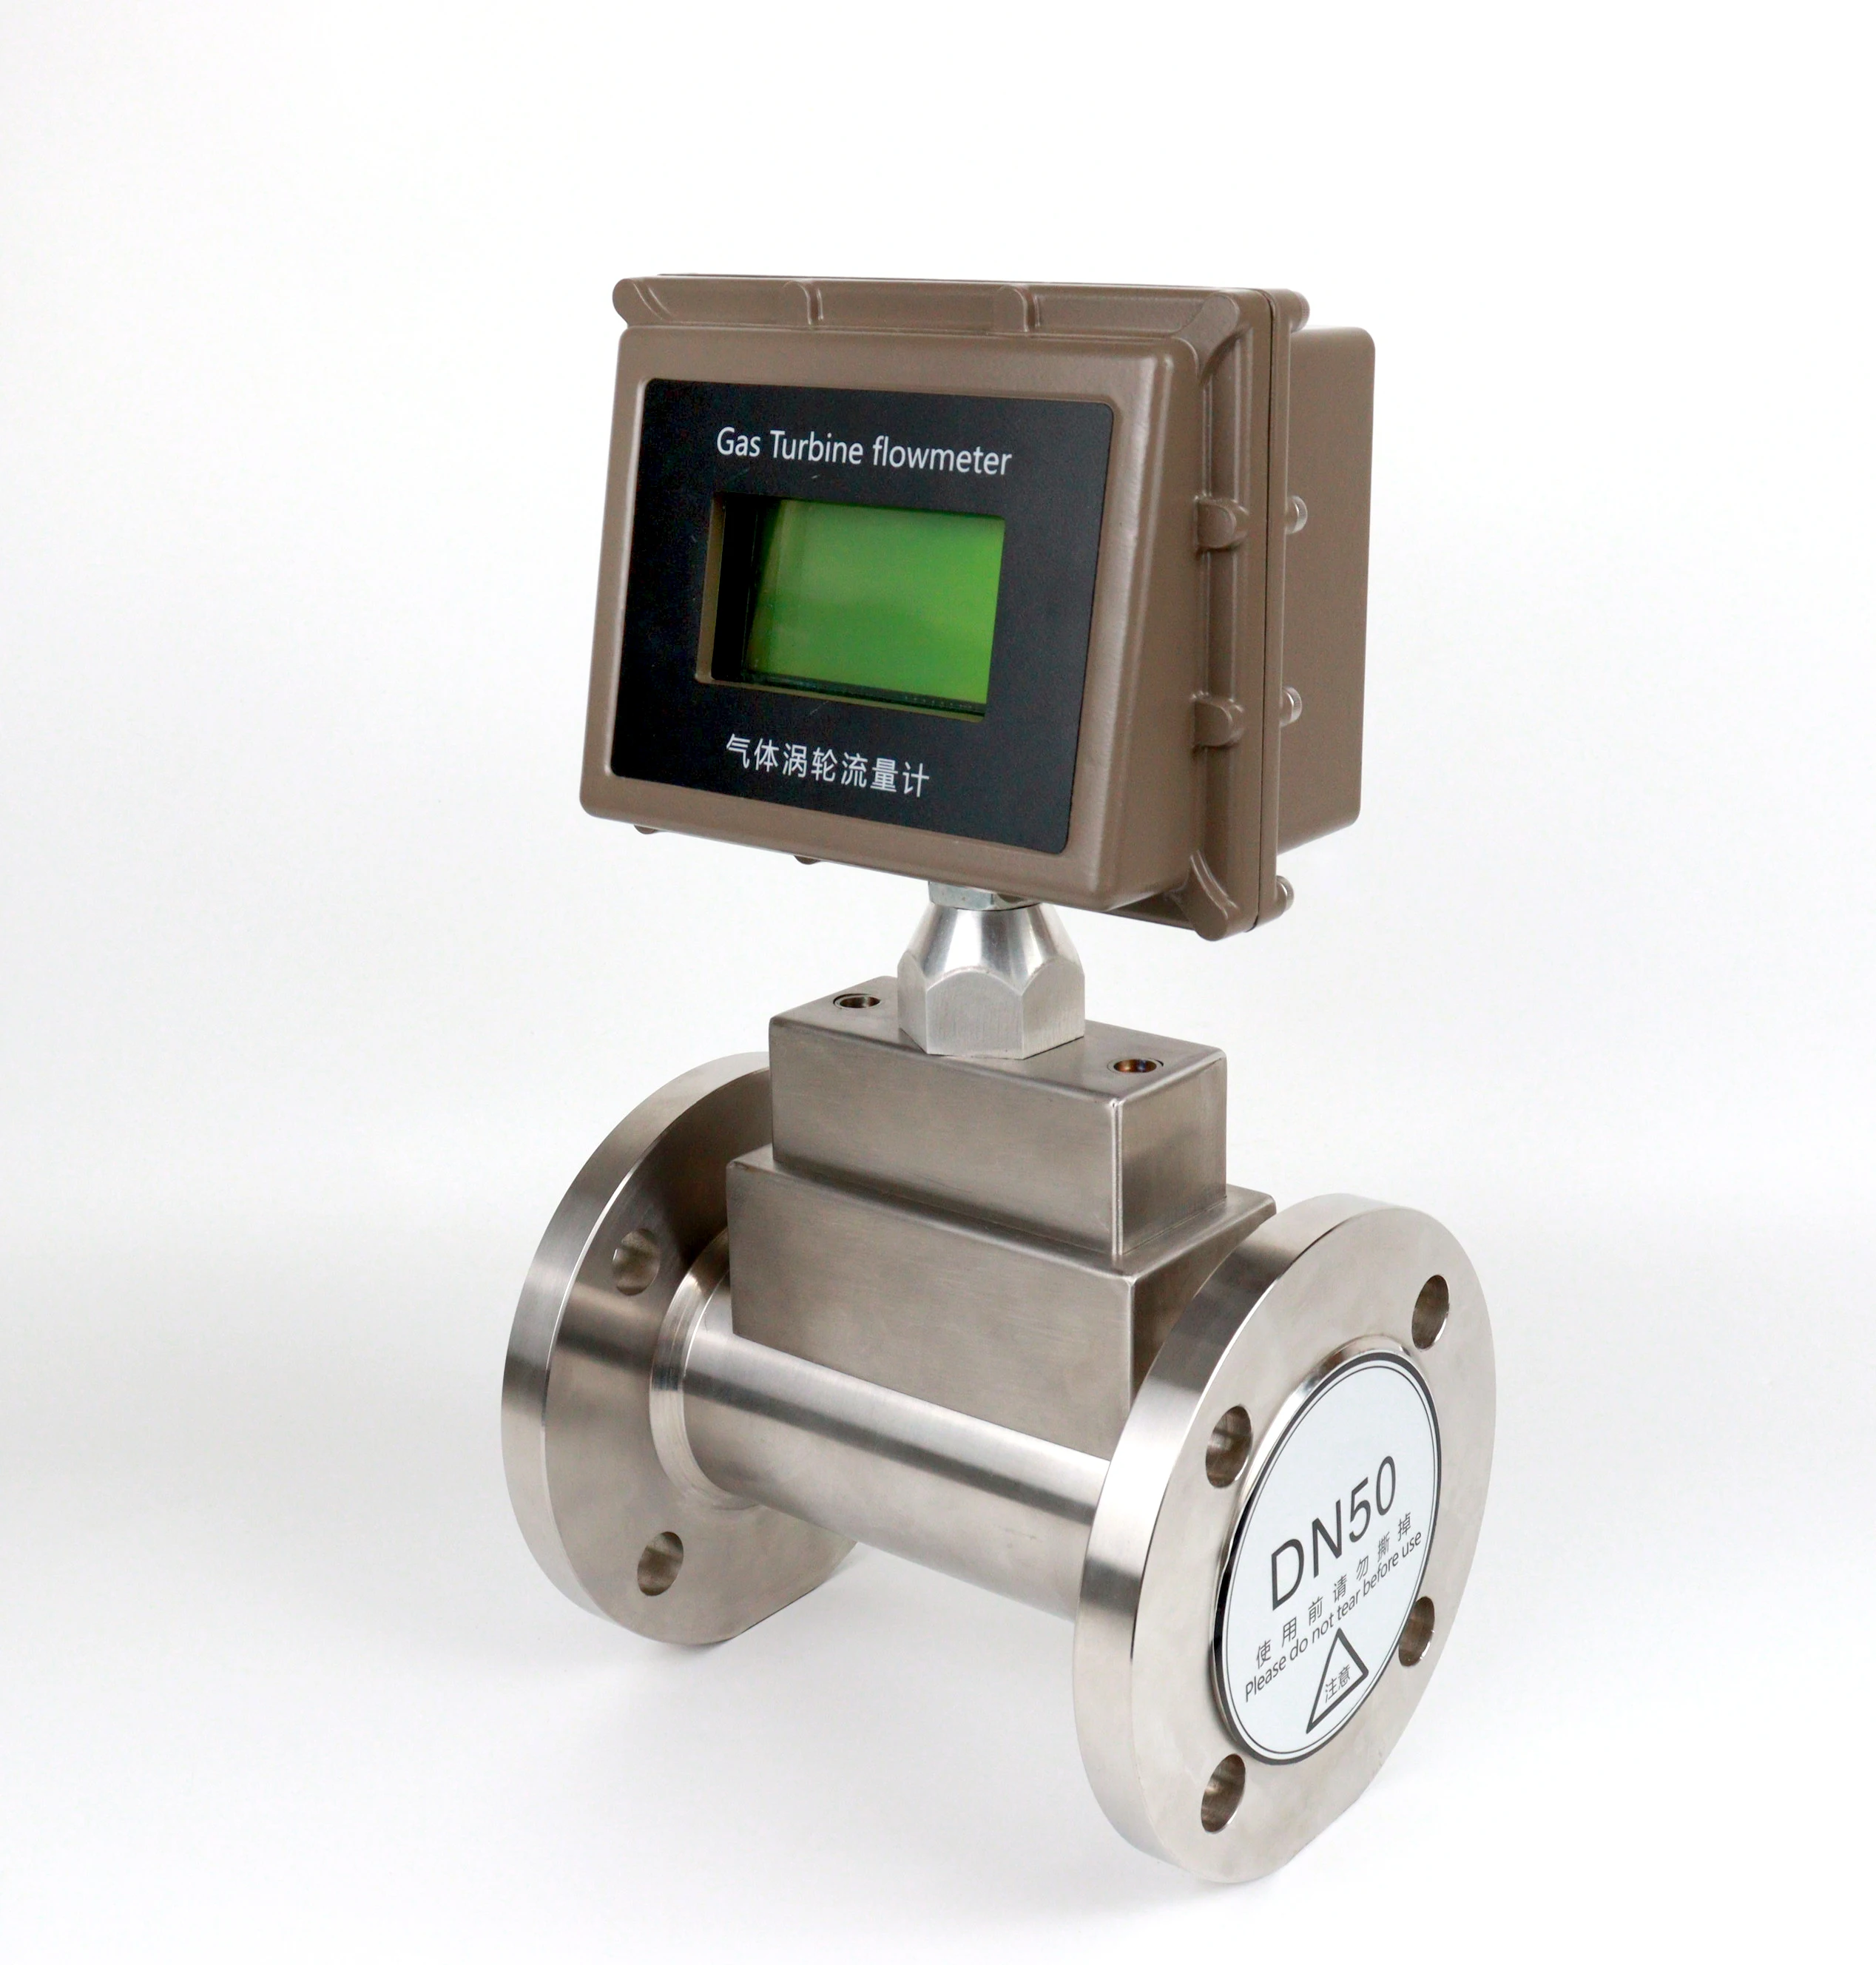 

Square Meter DN25 Flange Connection Stainless Steel Dual Power Supply Live Display Pulse Output Turbine Gas Flow Meter